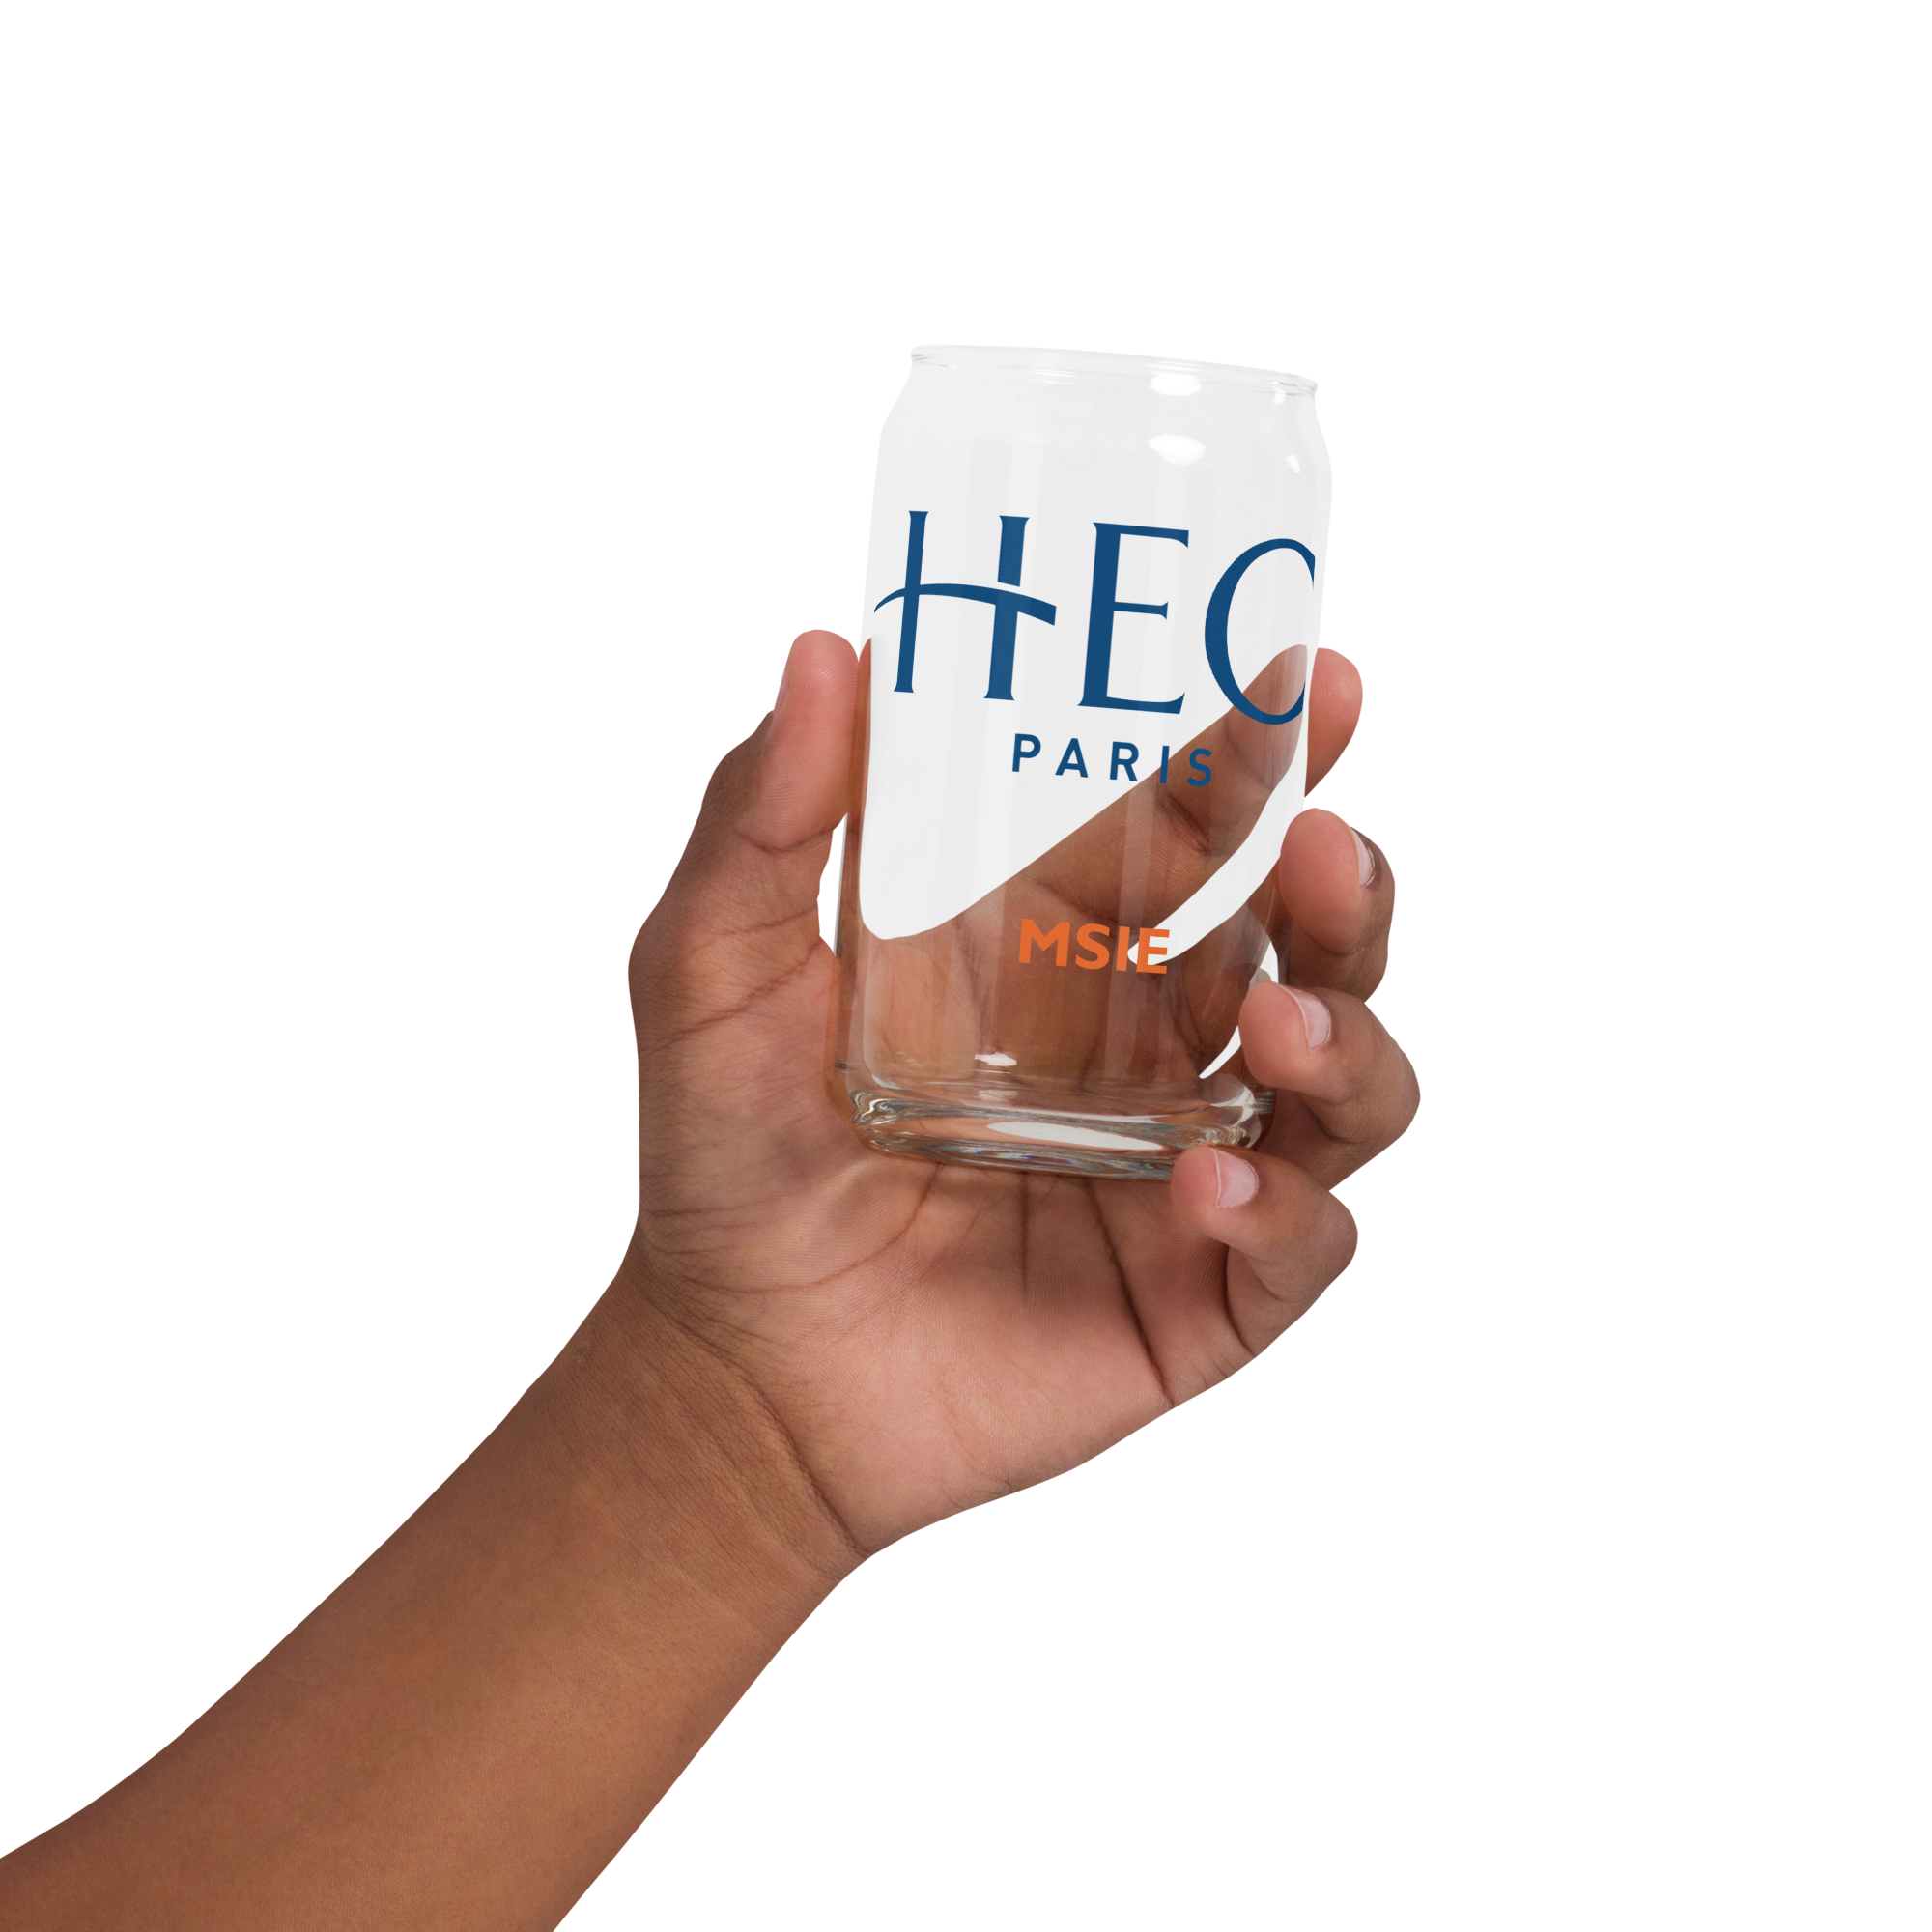 HEC Paris MSIE Can-Shaped Glass